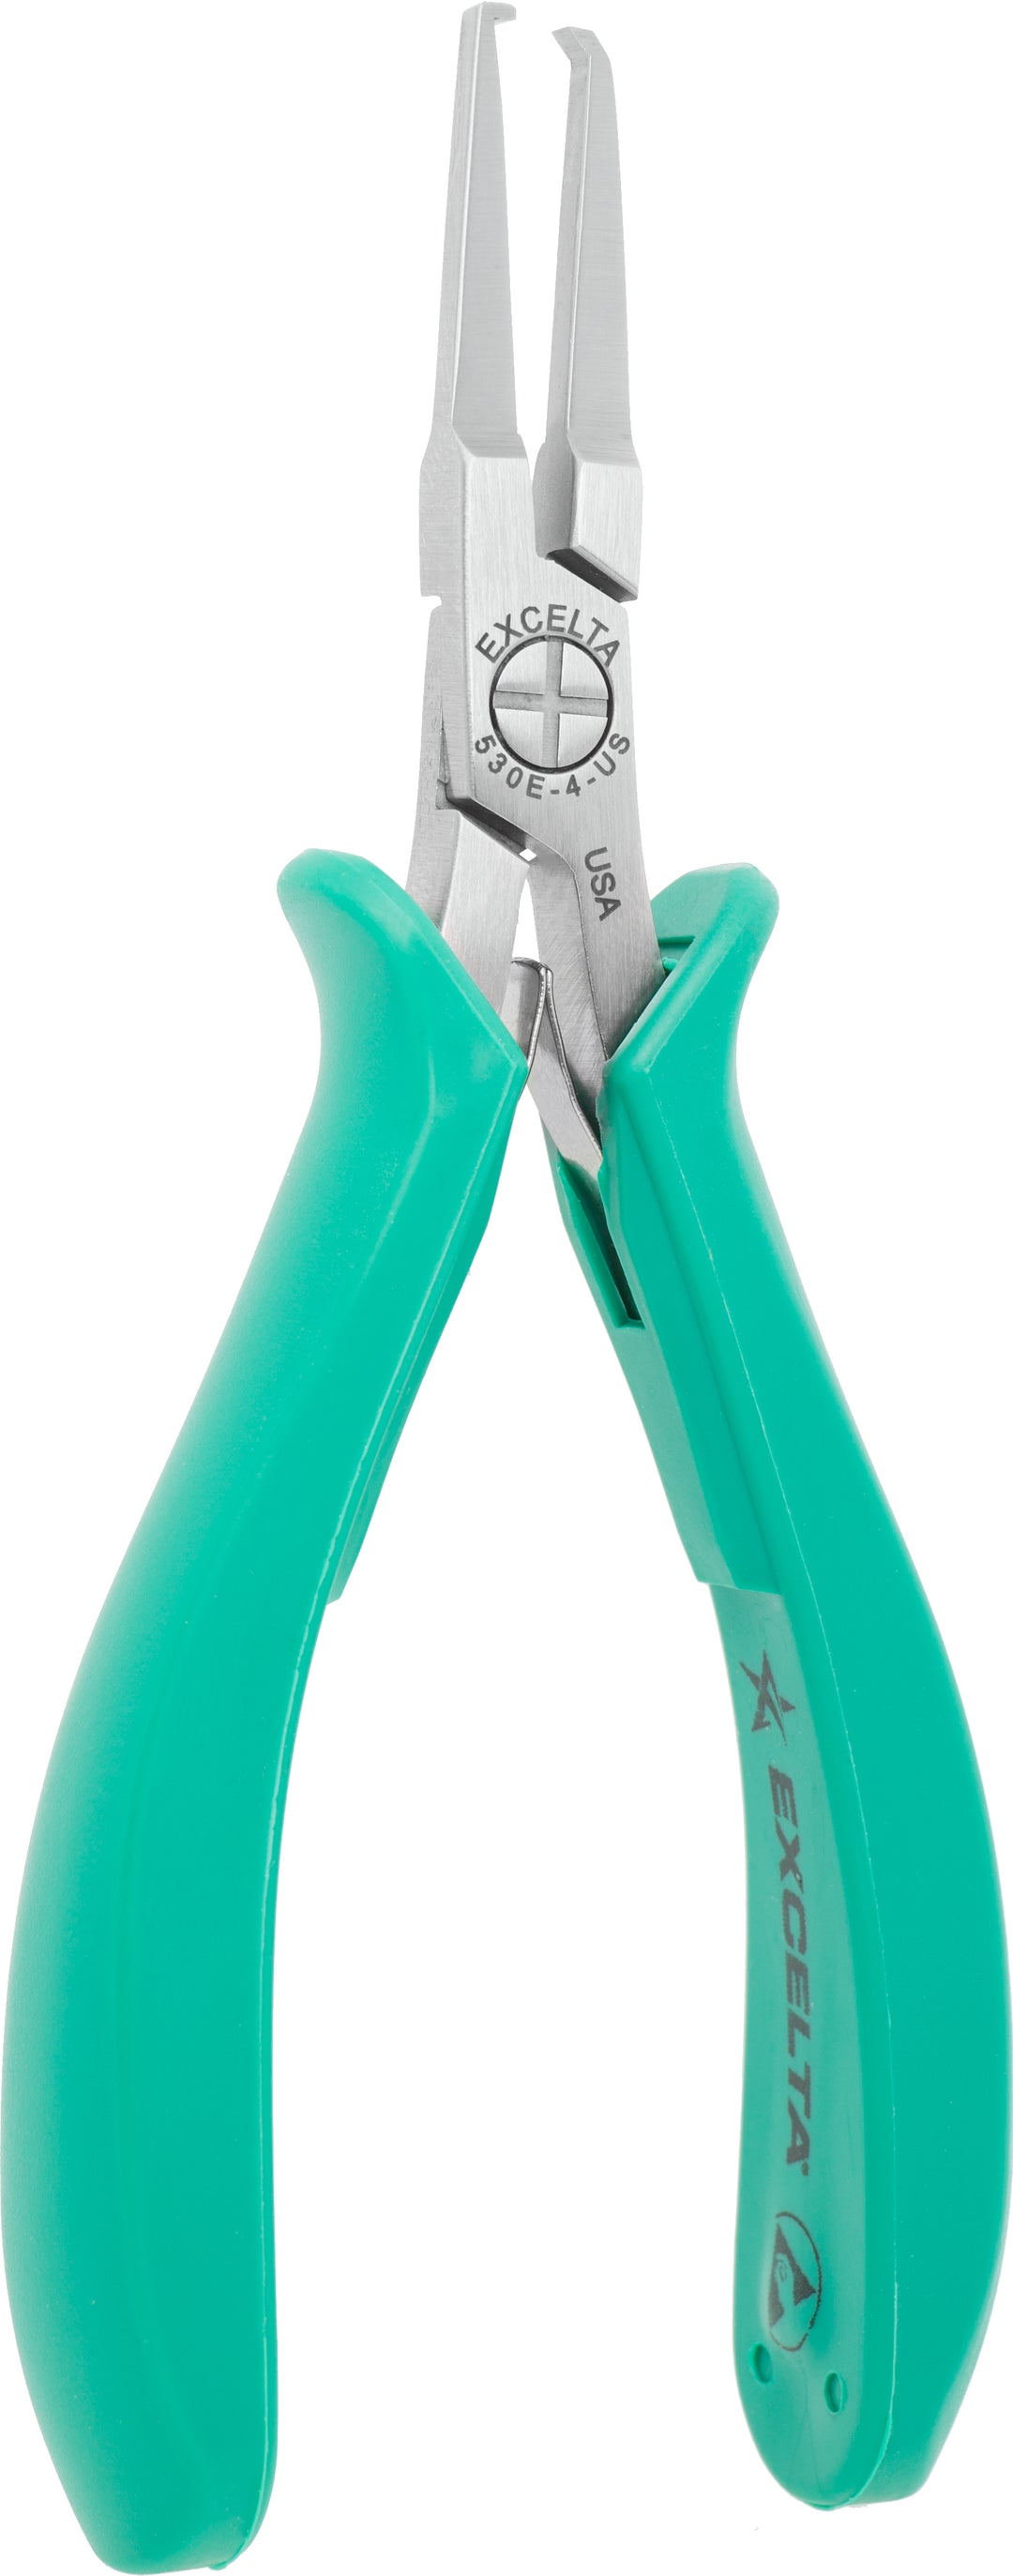 Excelta 530E-4-US-060 Cutters - Standoff Shear Small Frame -- .060" Standoff - Long Thin Jaw